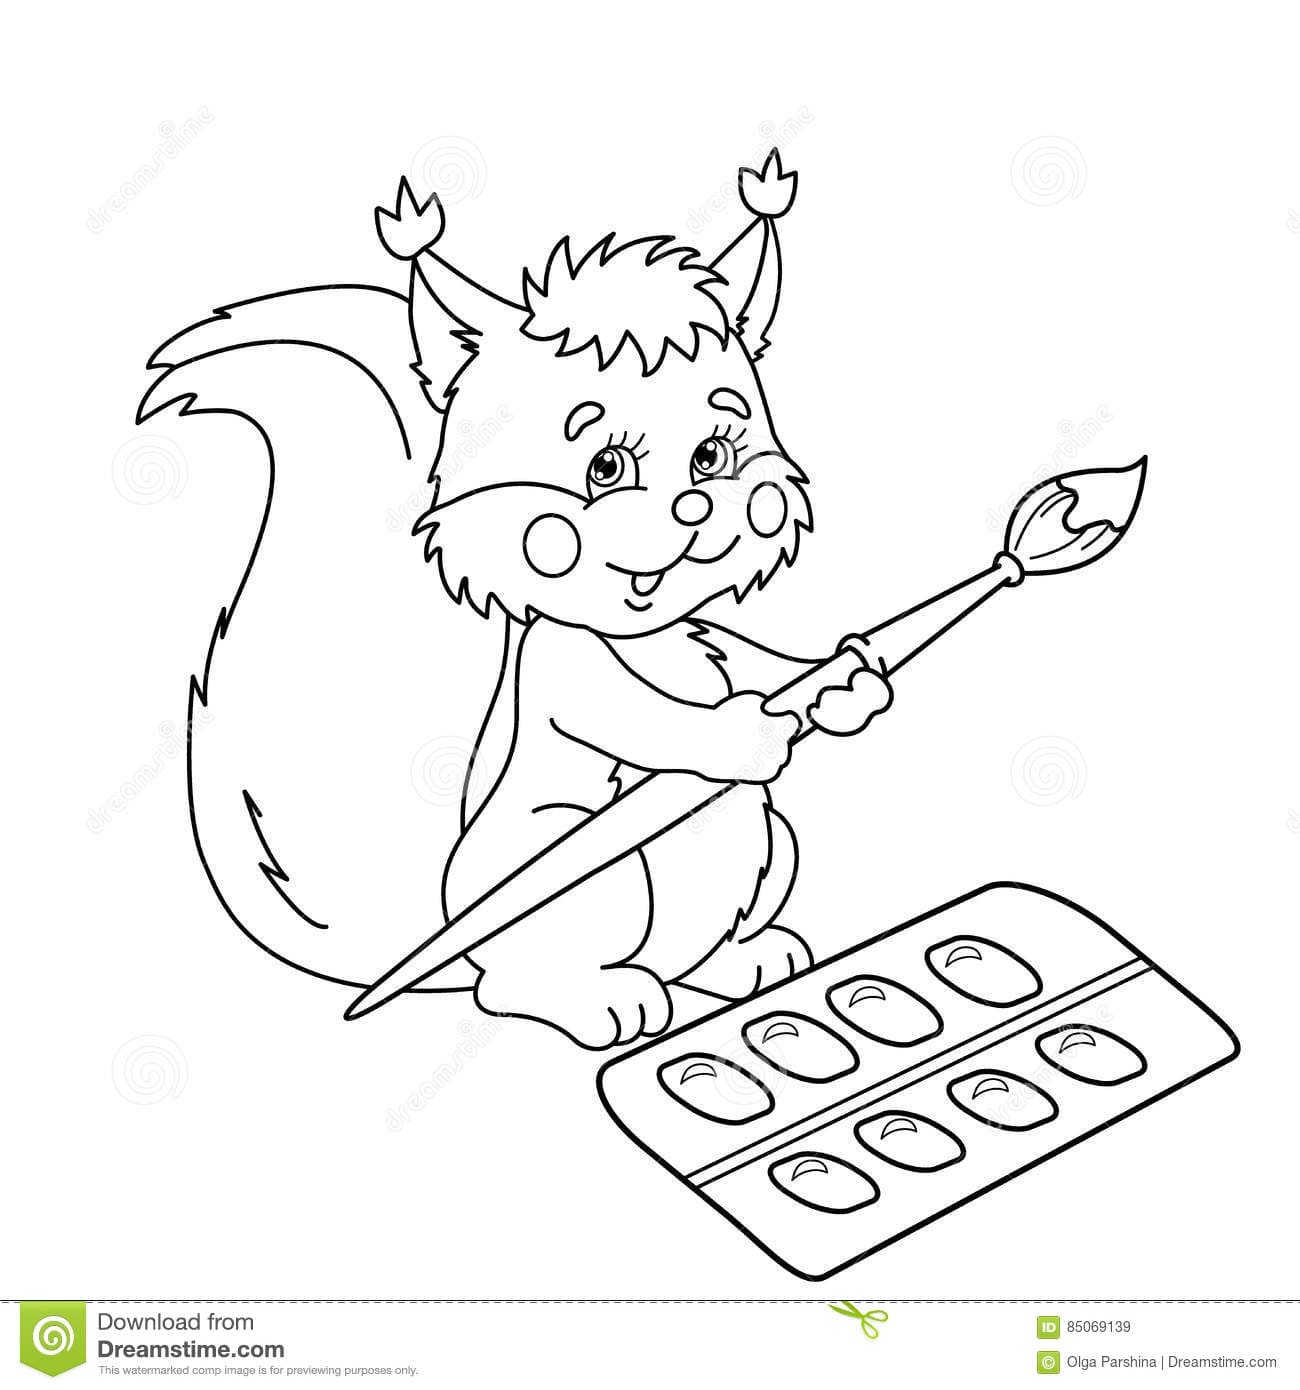 Coloring Page Outline Of Cartoon Squirrel With Brushes And Paints